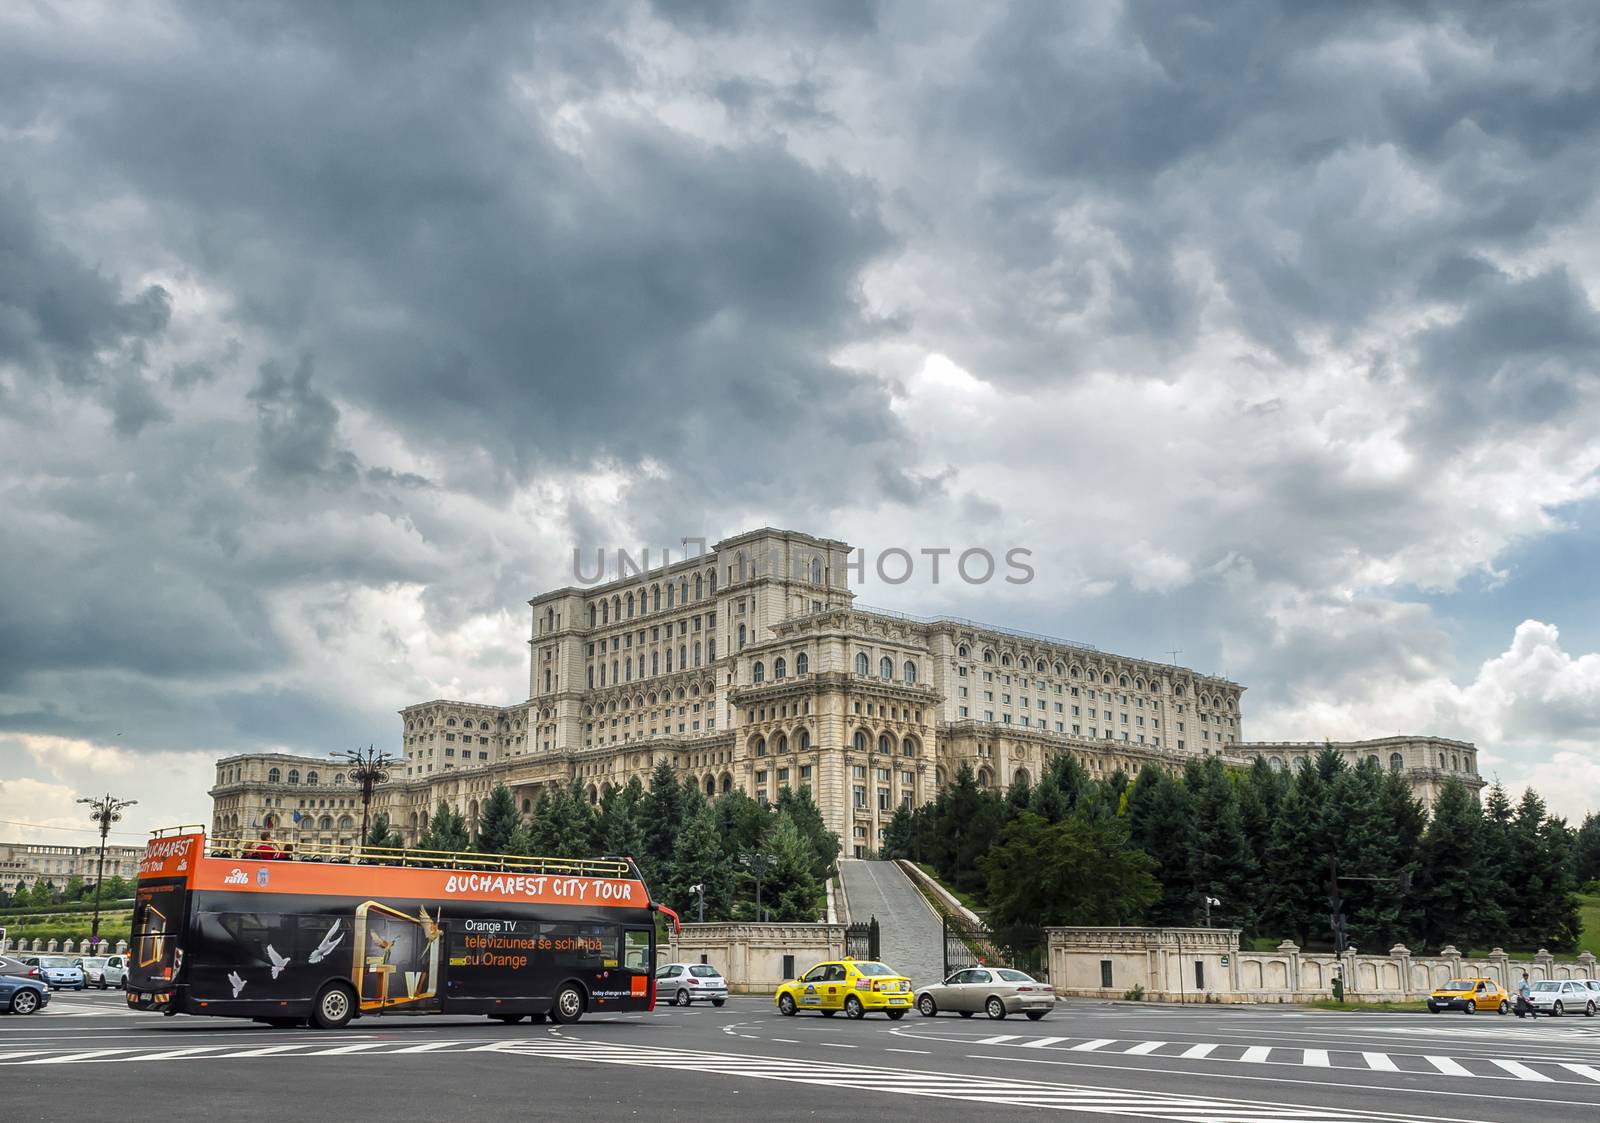 Bucharest, Romania - July 01, 2013: "House of Parliament" or "People's house" in Bucharest. Is the world's largest civilian administrative building on 01 July 2013 in Bucharest, Romania